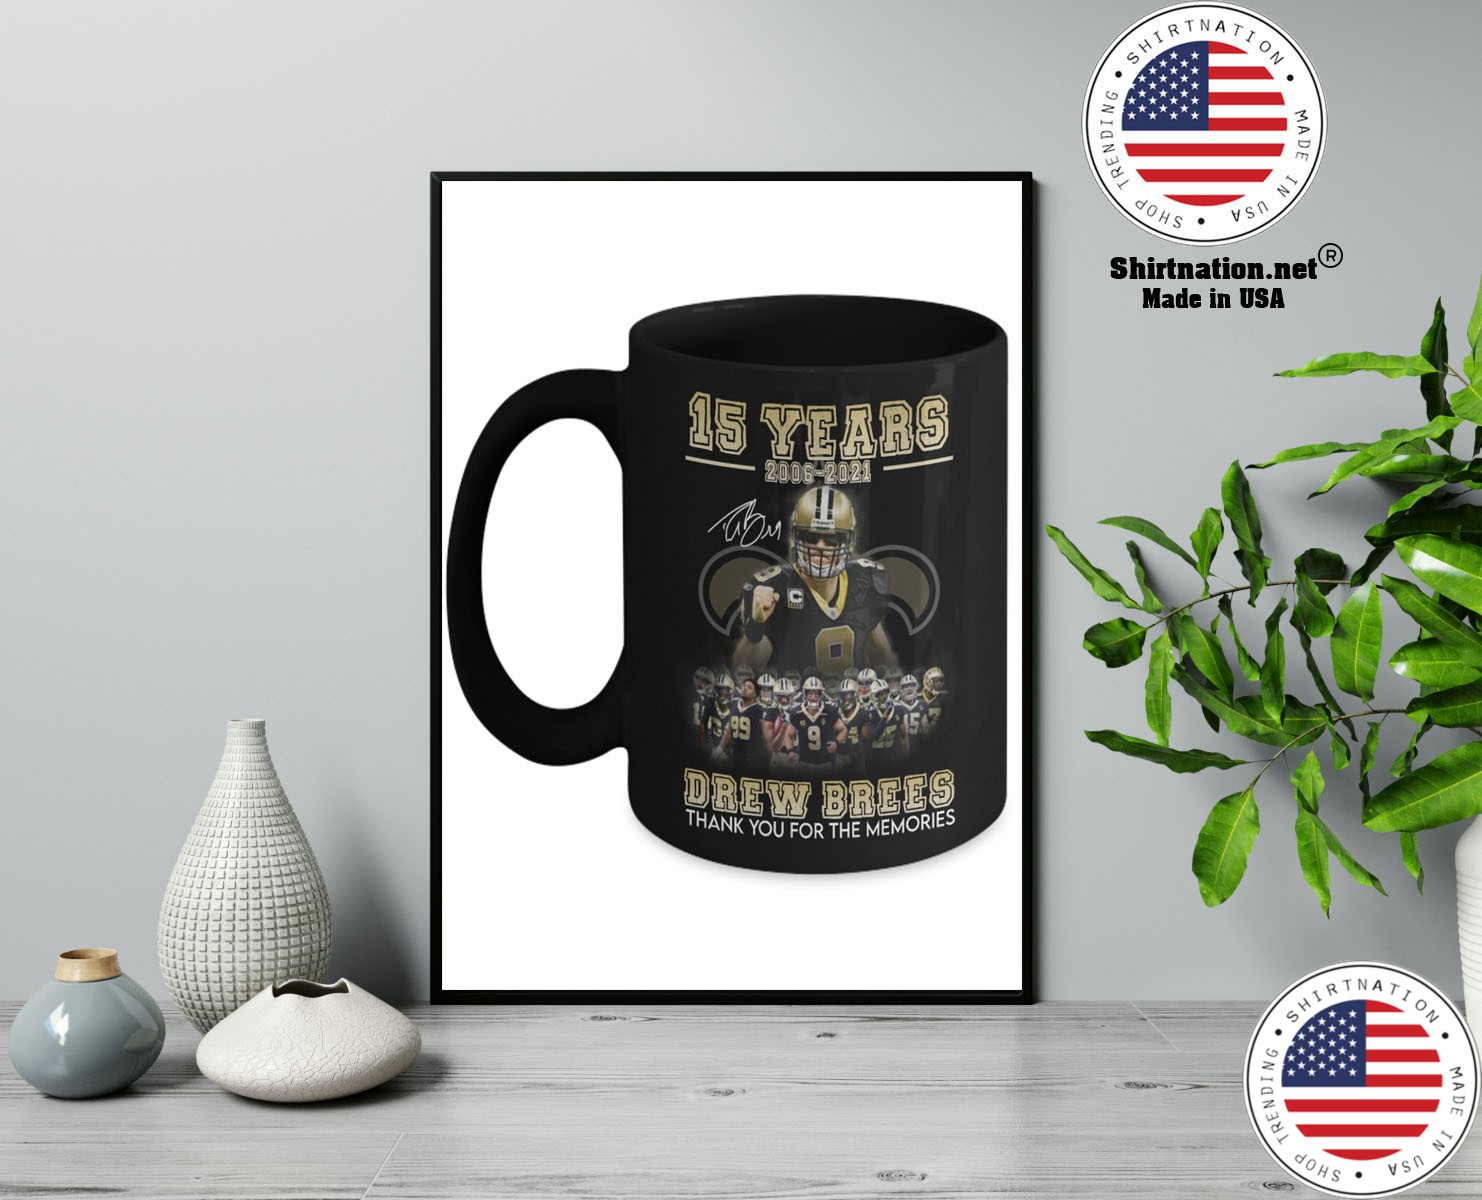 15 years 2006 2021 drew brees thank you for the memories mug 13